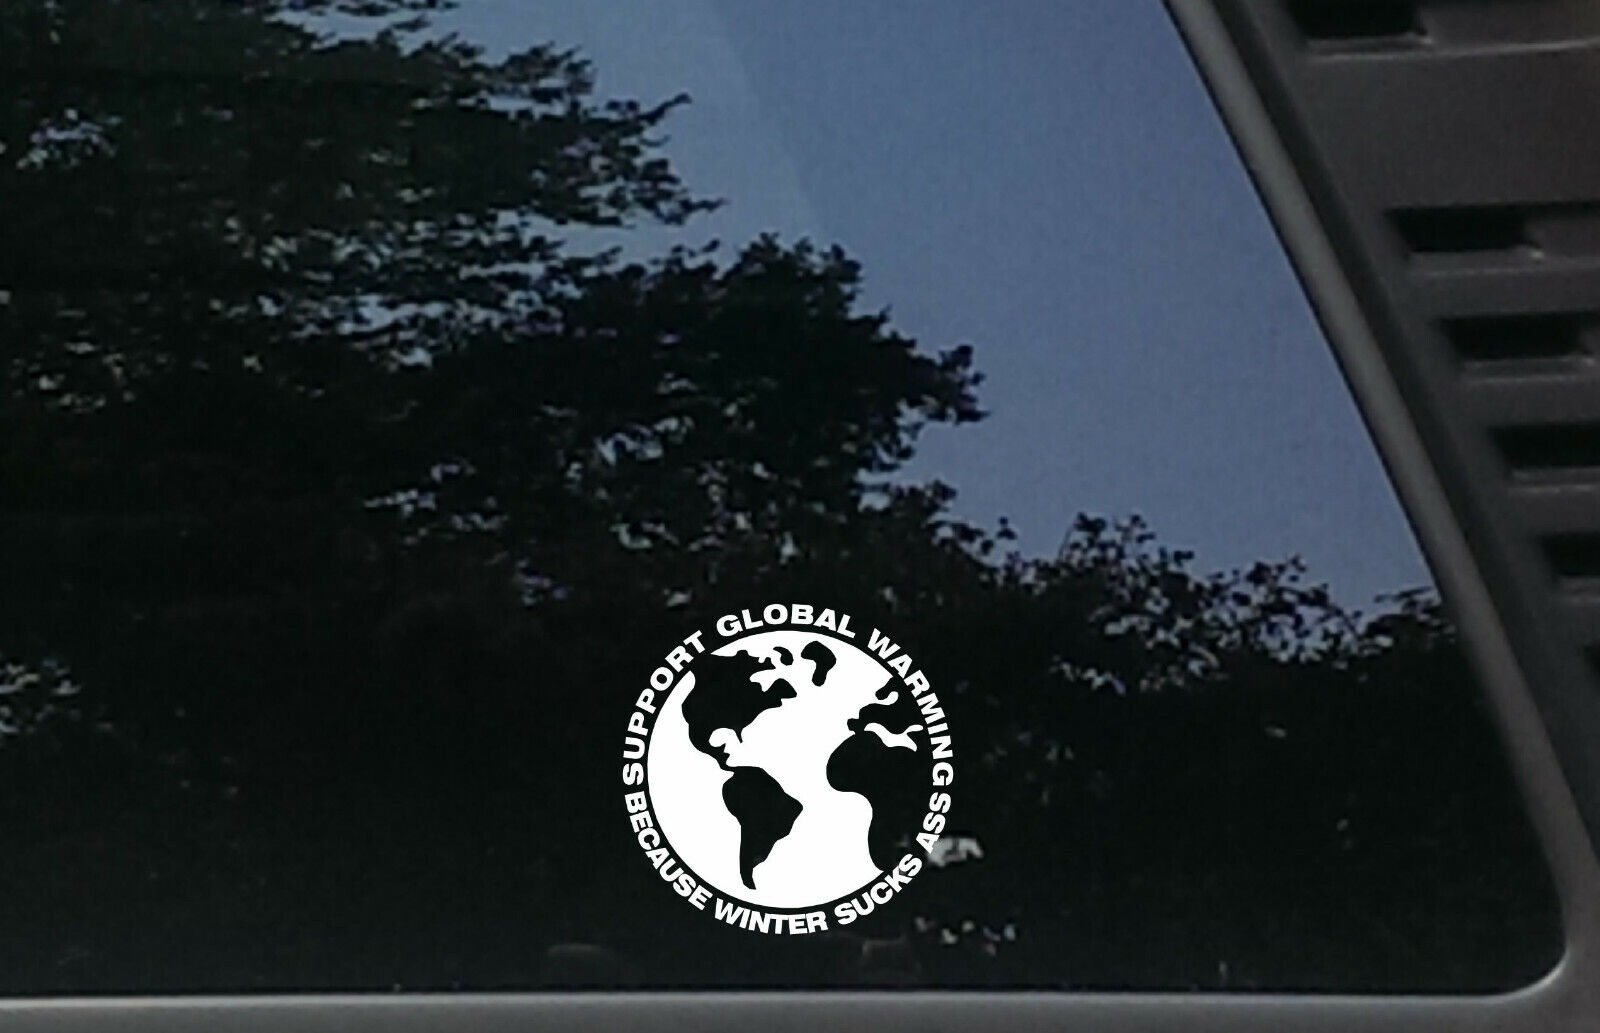 SUPPORT GLOBAL WARMING Funny decal 3½x3½ winter SUCKS